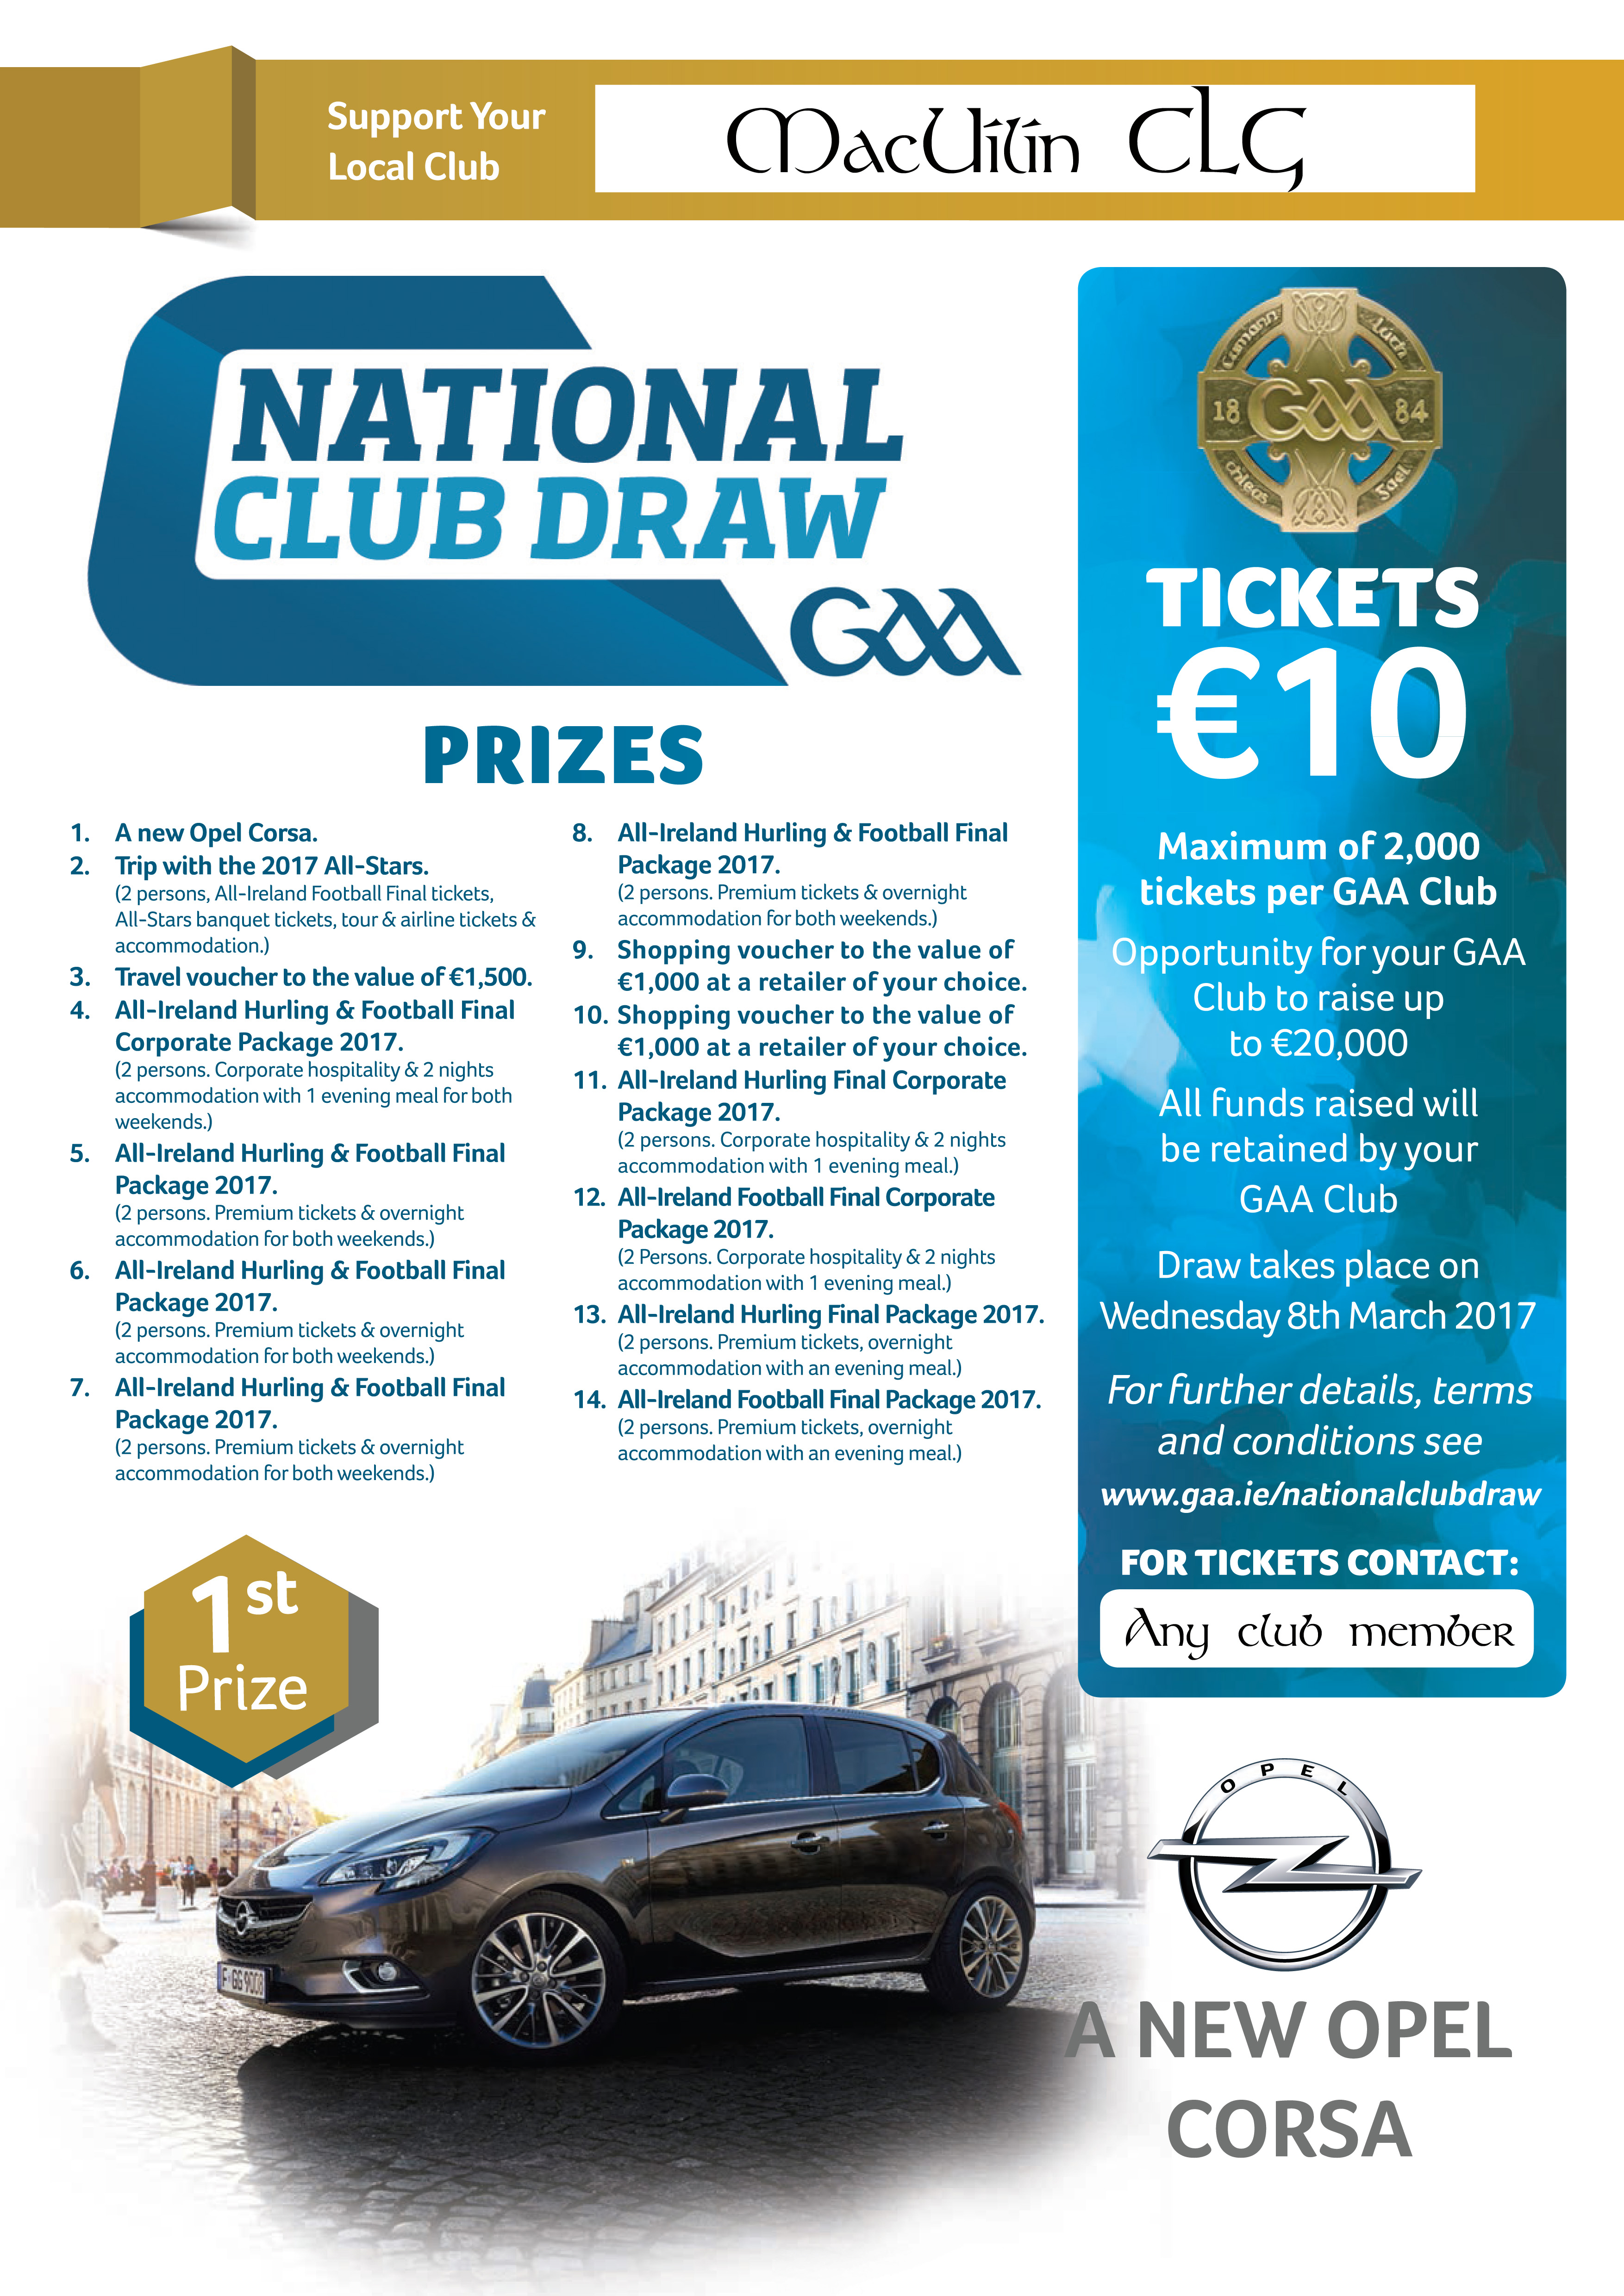 National Club Draw tickets must be returned by Wednesday 8 February